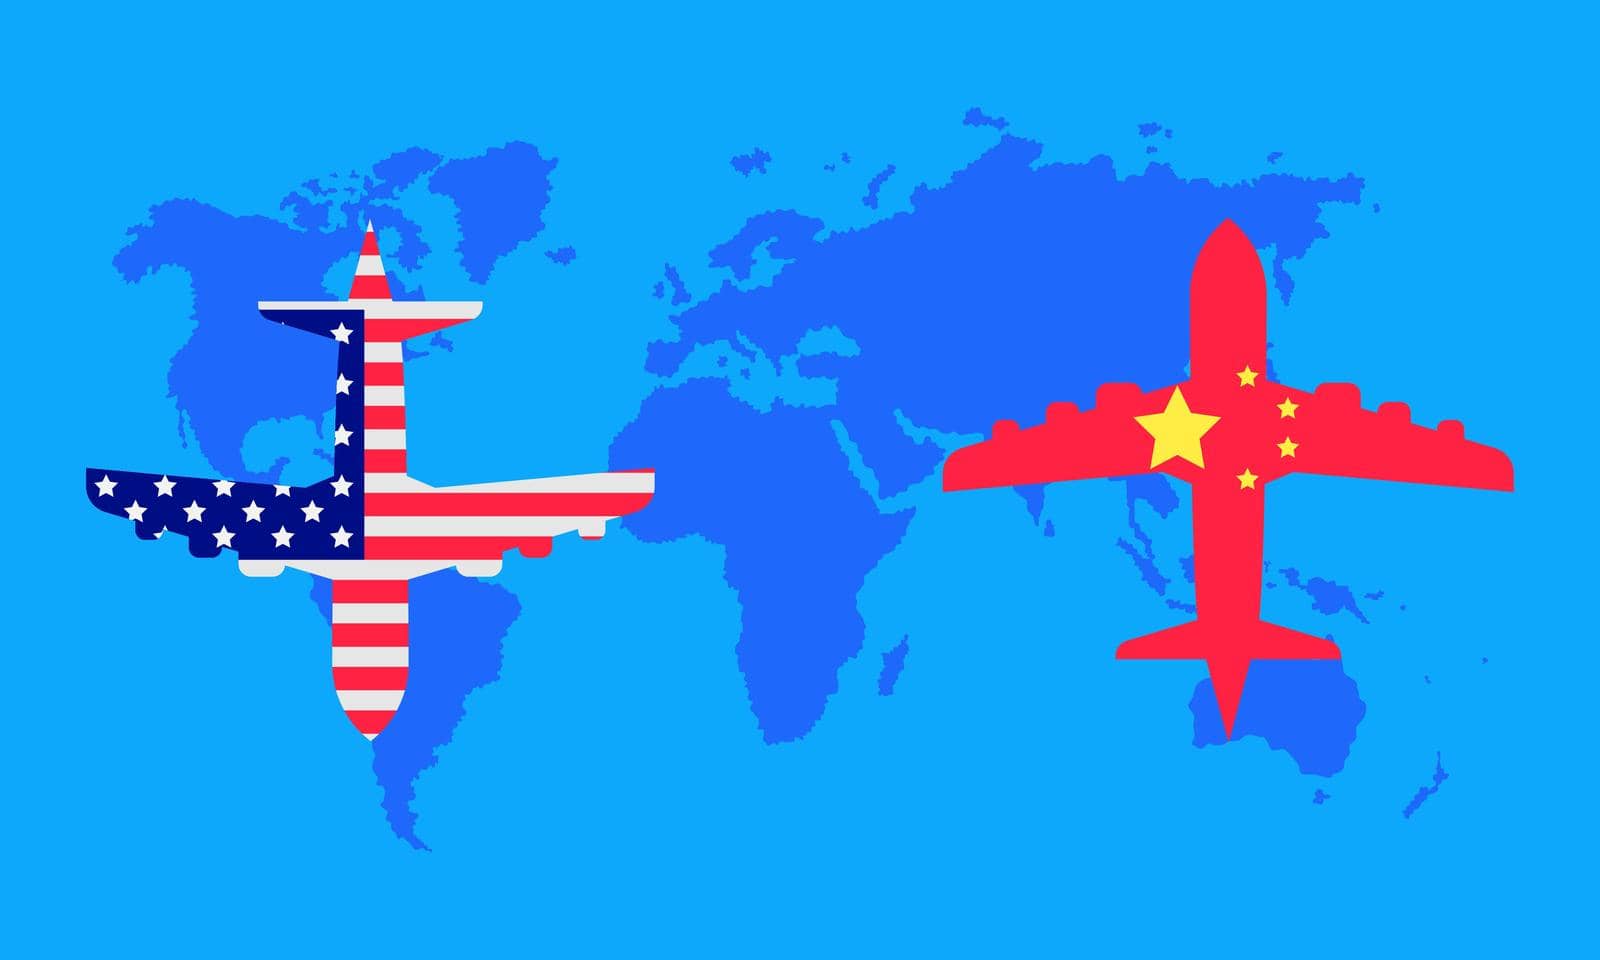 trade war. plane transports associated company factory world map. vector illustration eps10 by Kmaunta